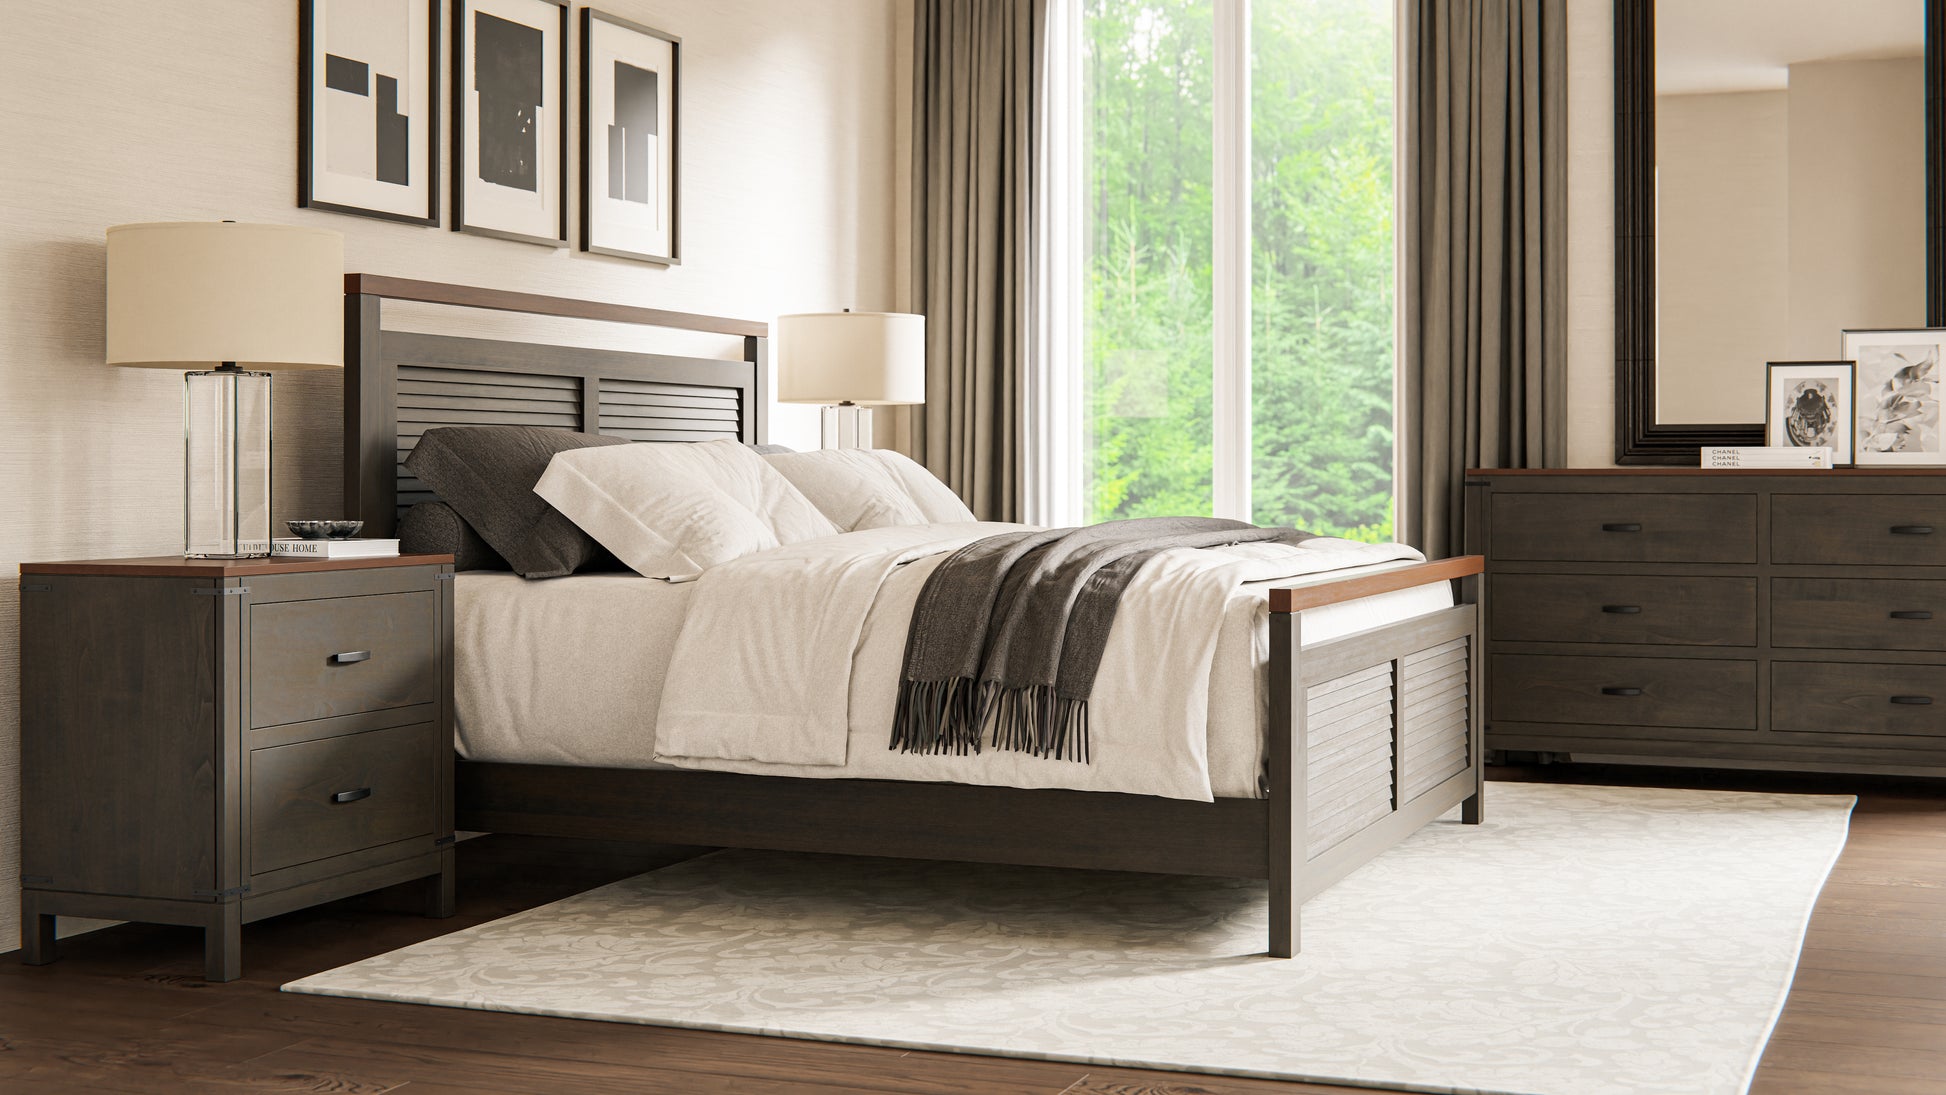 The Lumina, Modern Bed Moderncre8ve